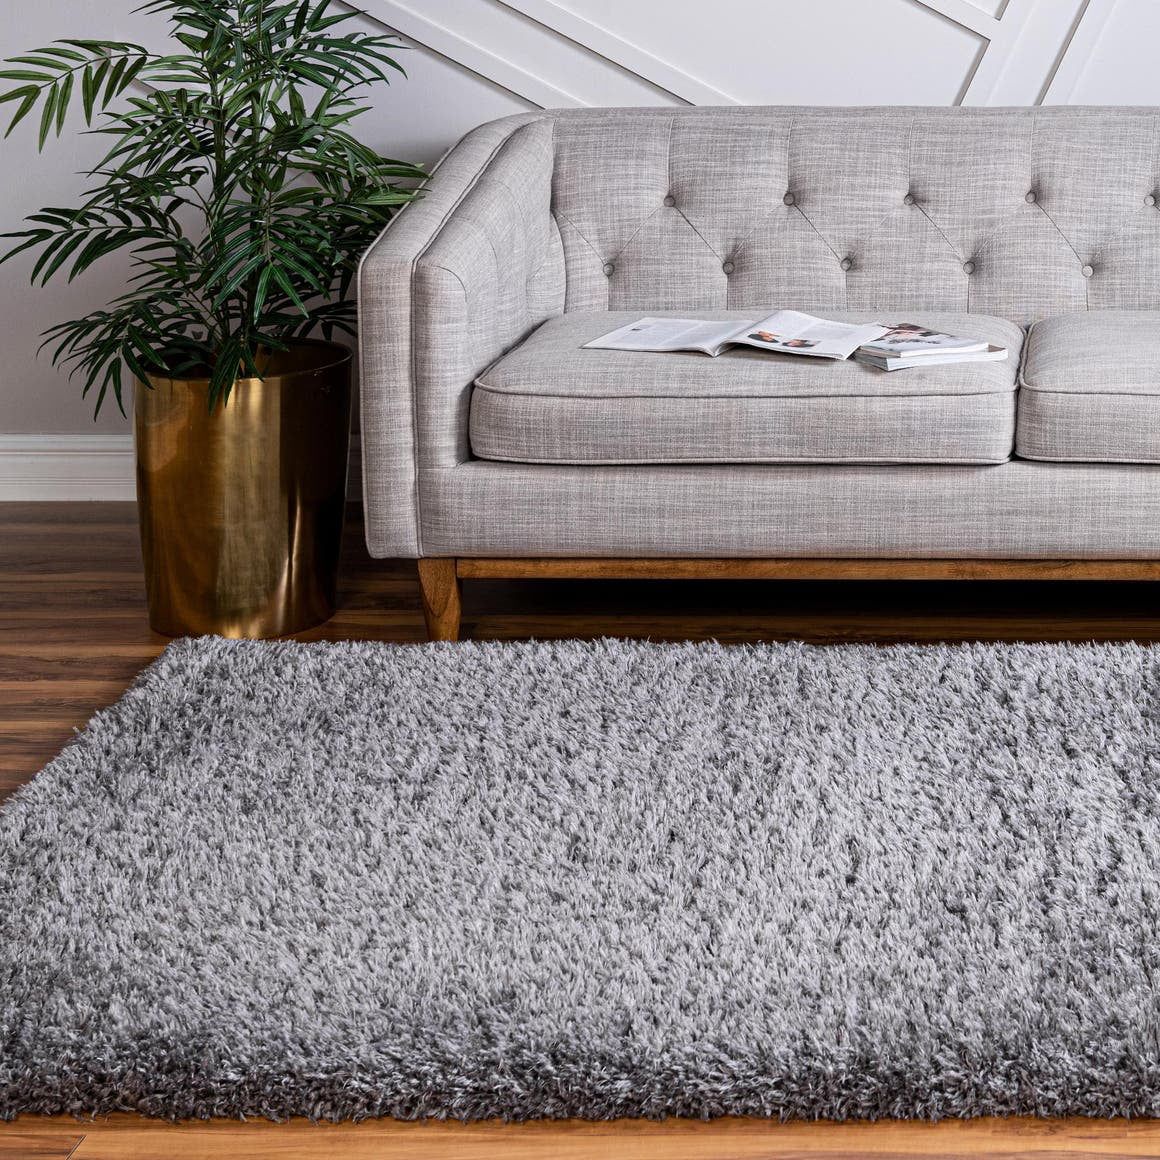 Infinity Collection Solid Shag Area Rugrugs ‚Äì Smoke 5' X 8'  High Pile Plush Shag Rug Perfect For Living Rooms, Bedrooms, Dining Rooms  And More – Walmart With Ash Infinity Shag Rugs (View 2 of 15)